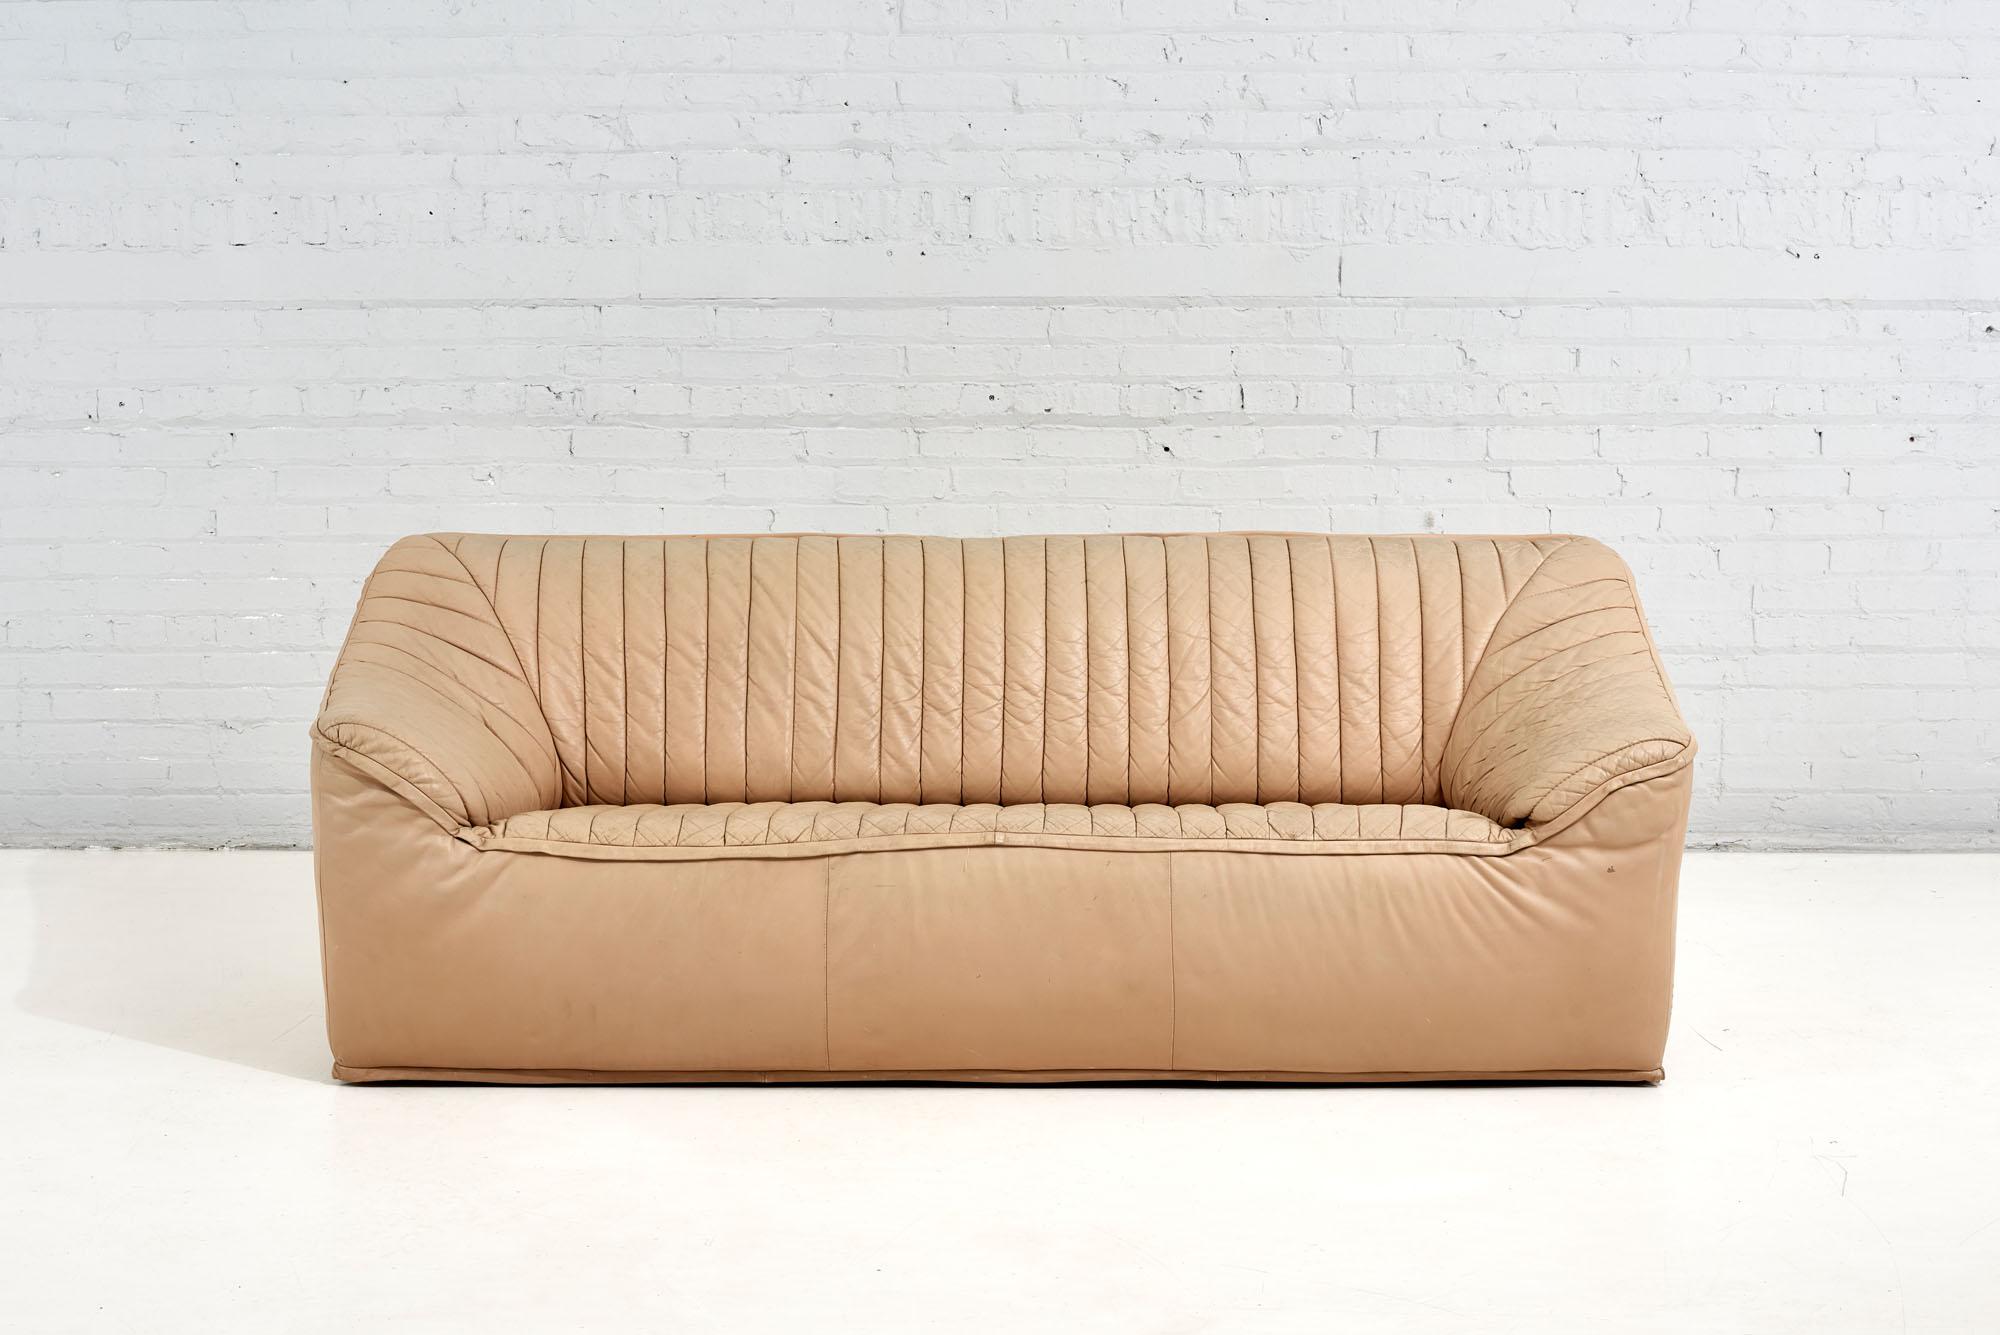 Channeled Leather sofa, 1970.